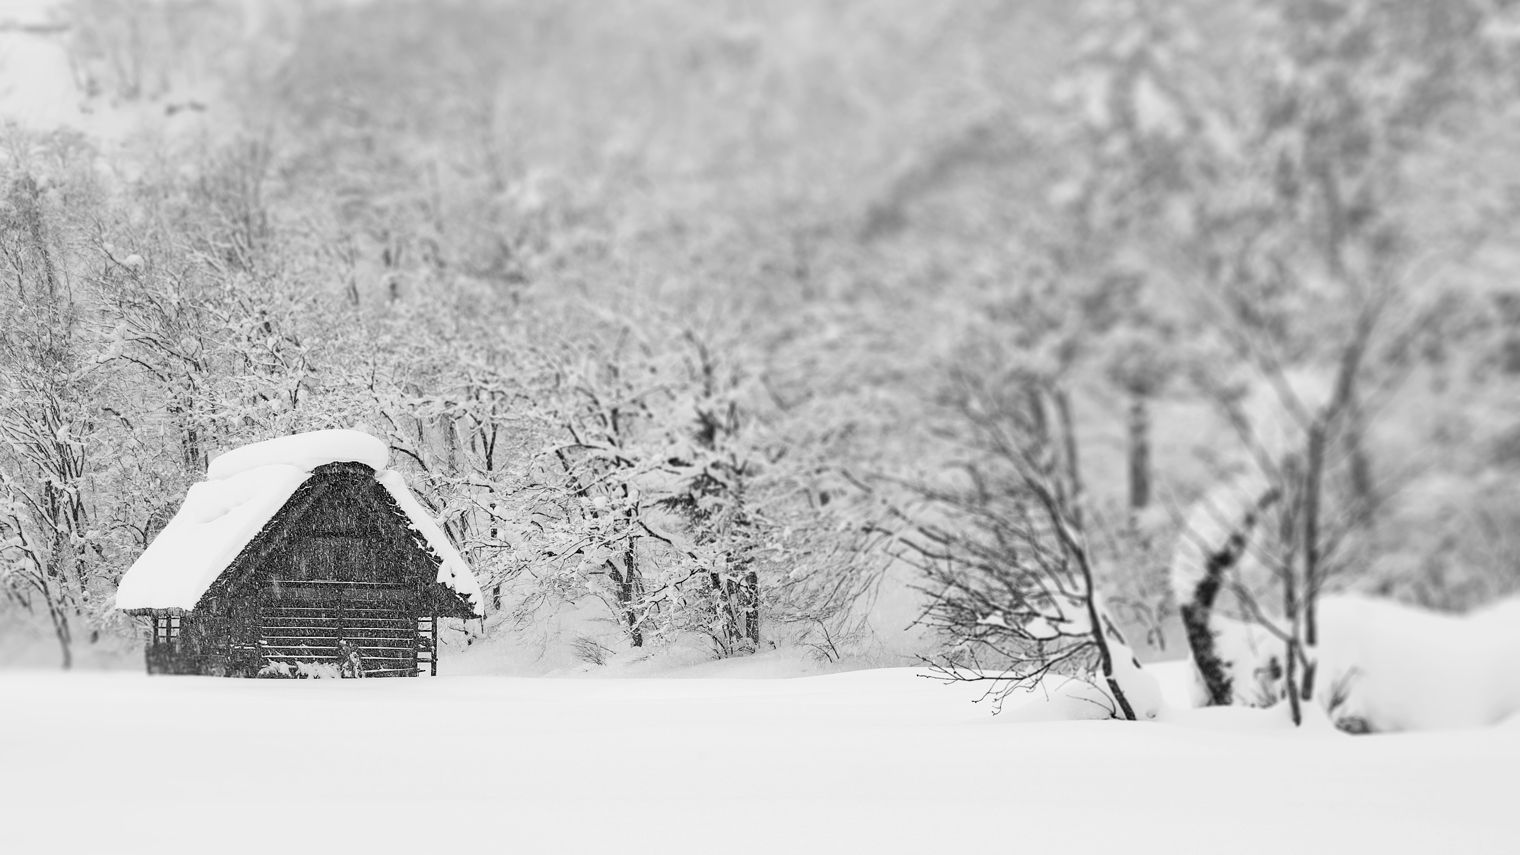 A small wooden hut nestled into the snow, surrounded by trees.